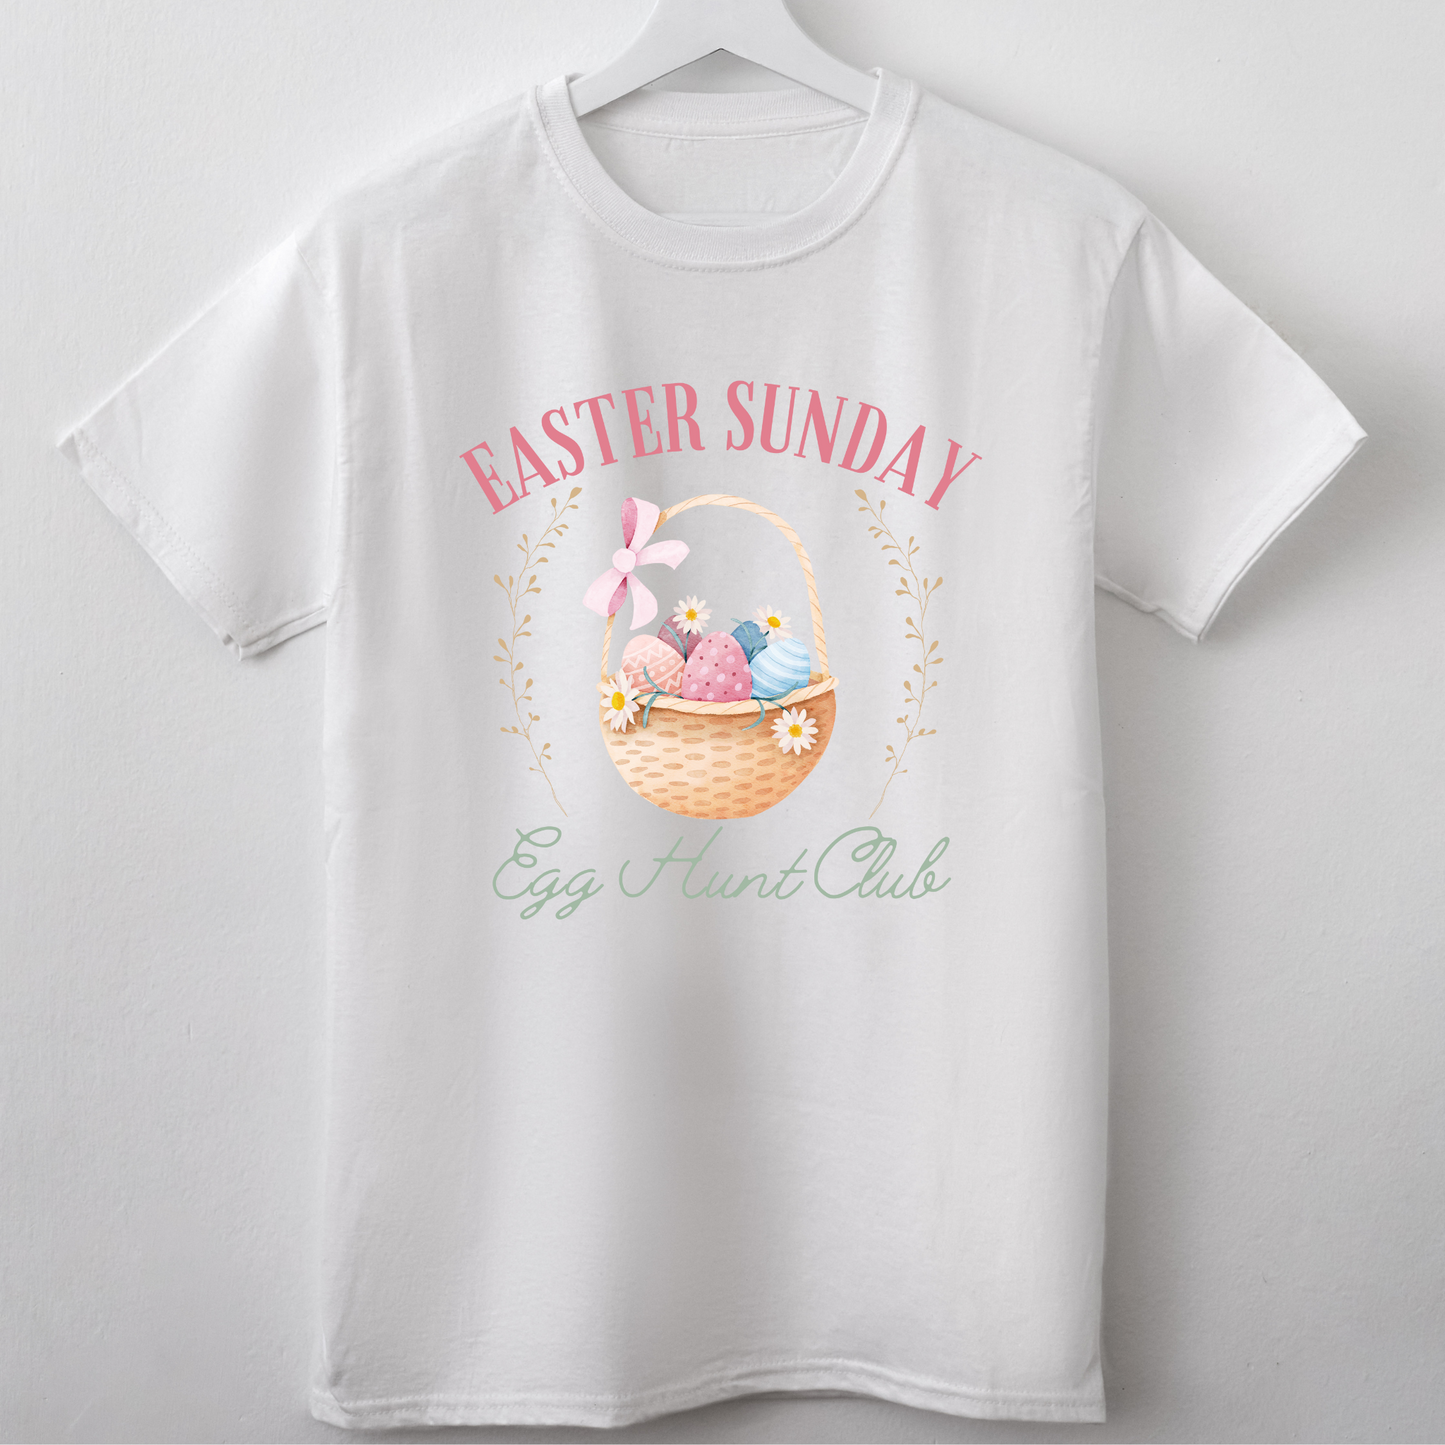 (Shirt not included) 7" Easter Sunday -  Matte Clear Film Transfer